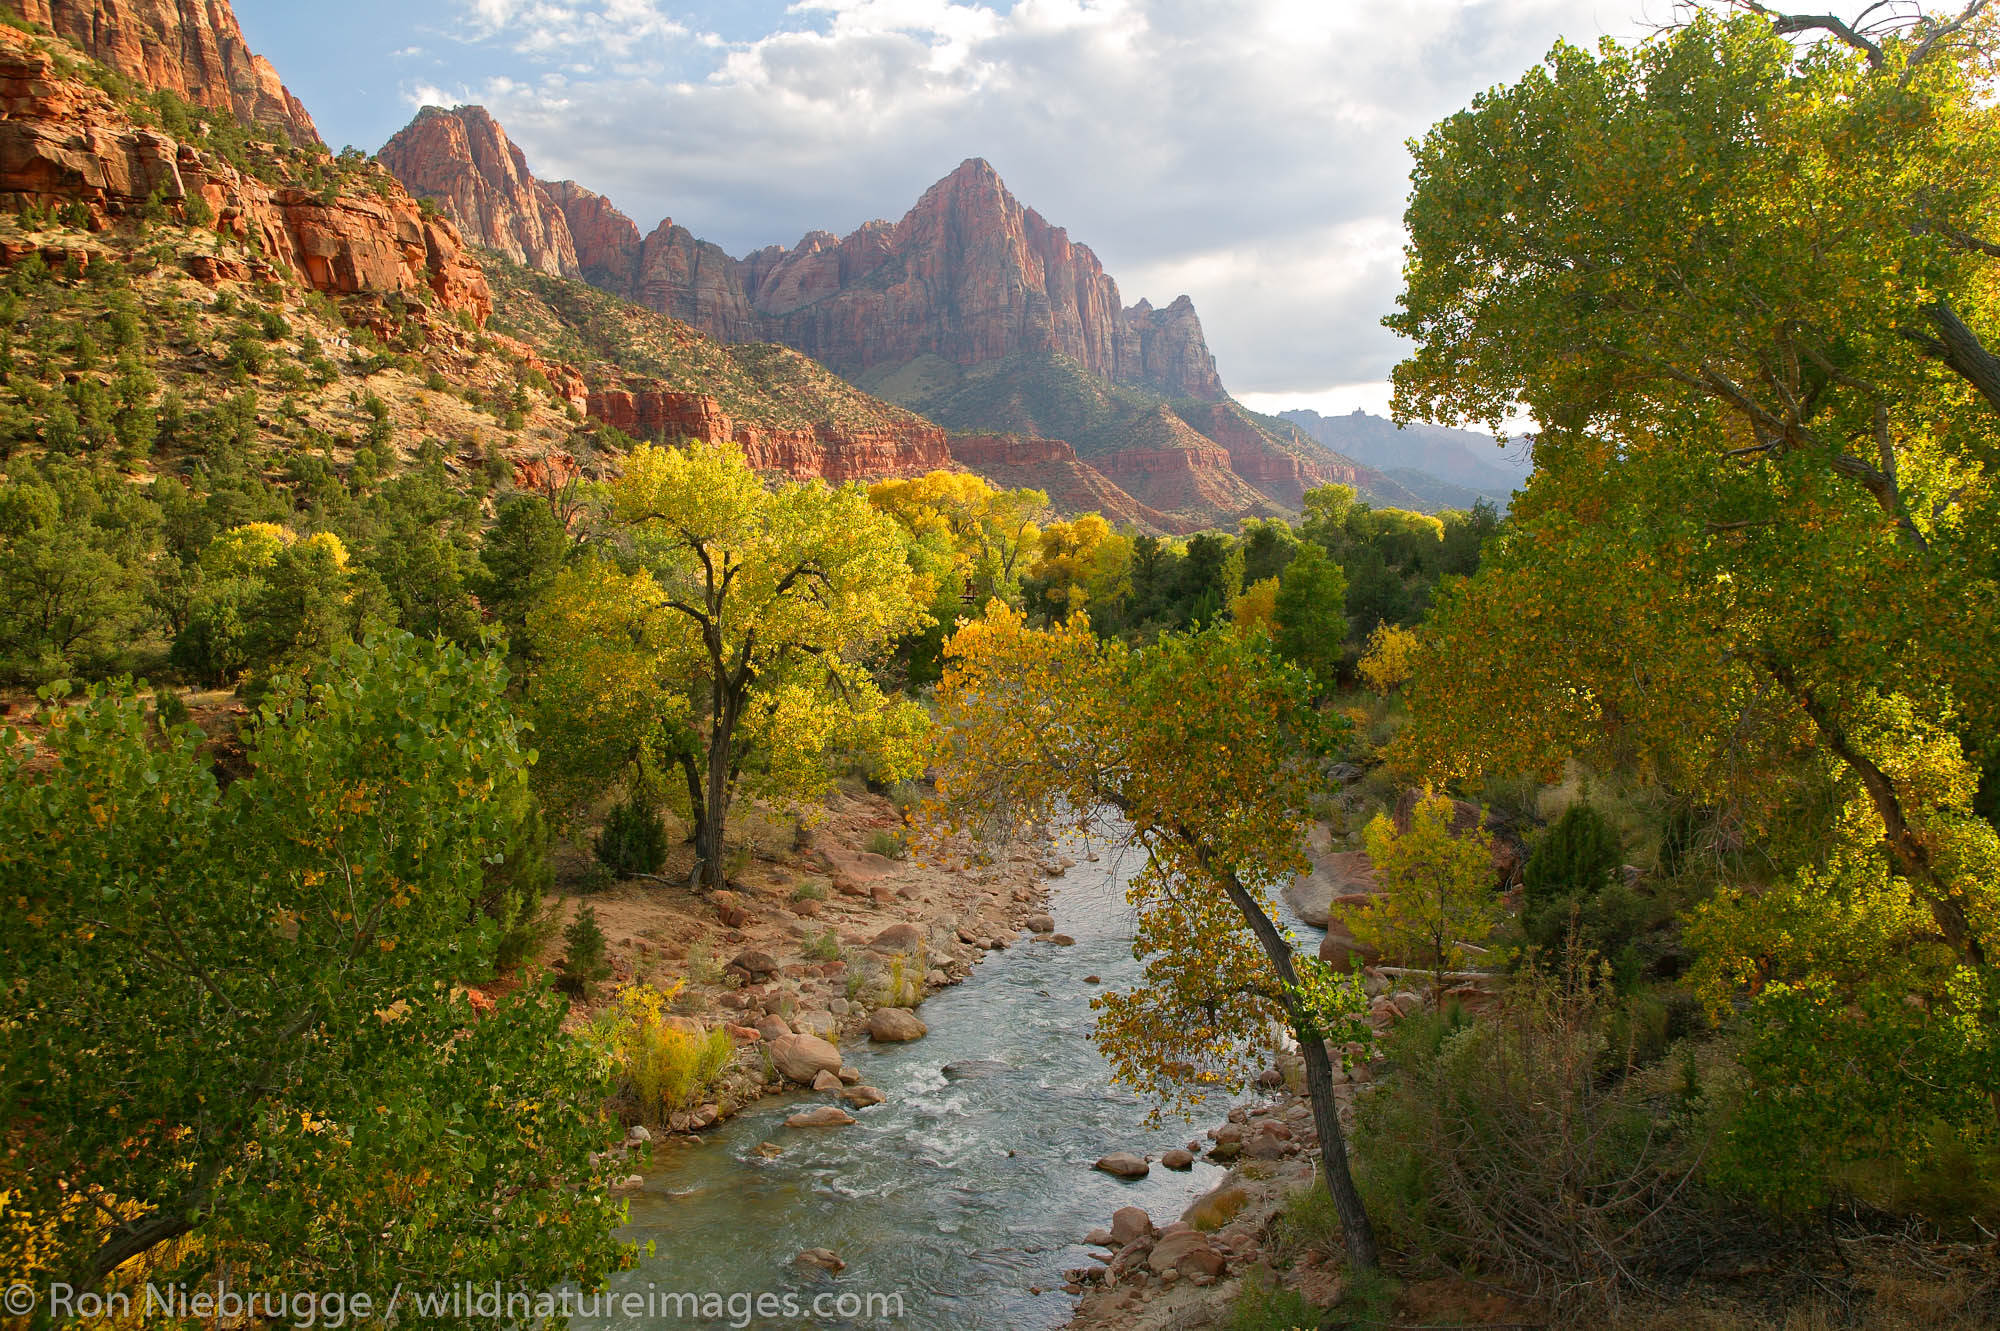 North Fork Virgin River and The Watchman, Zion National Park, Utah.